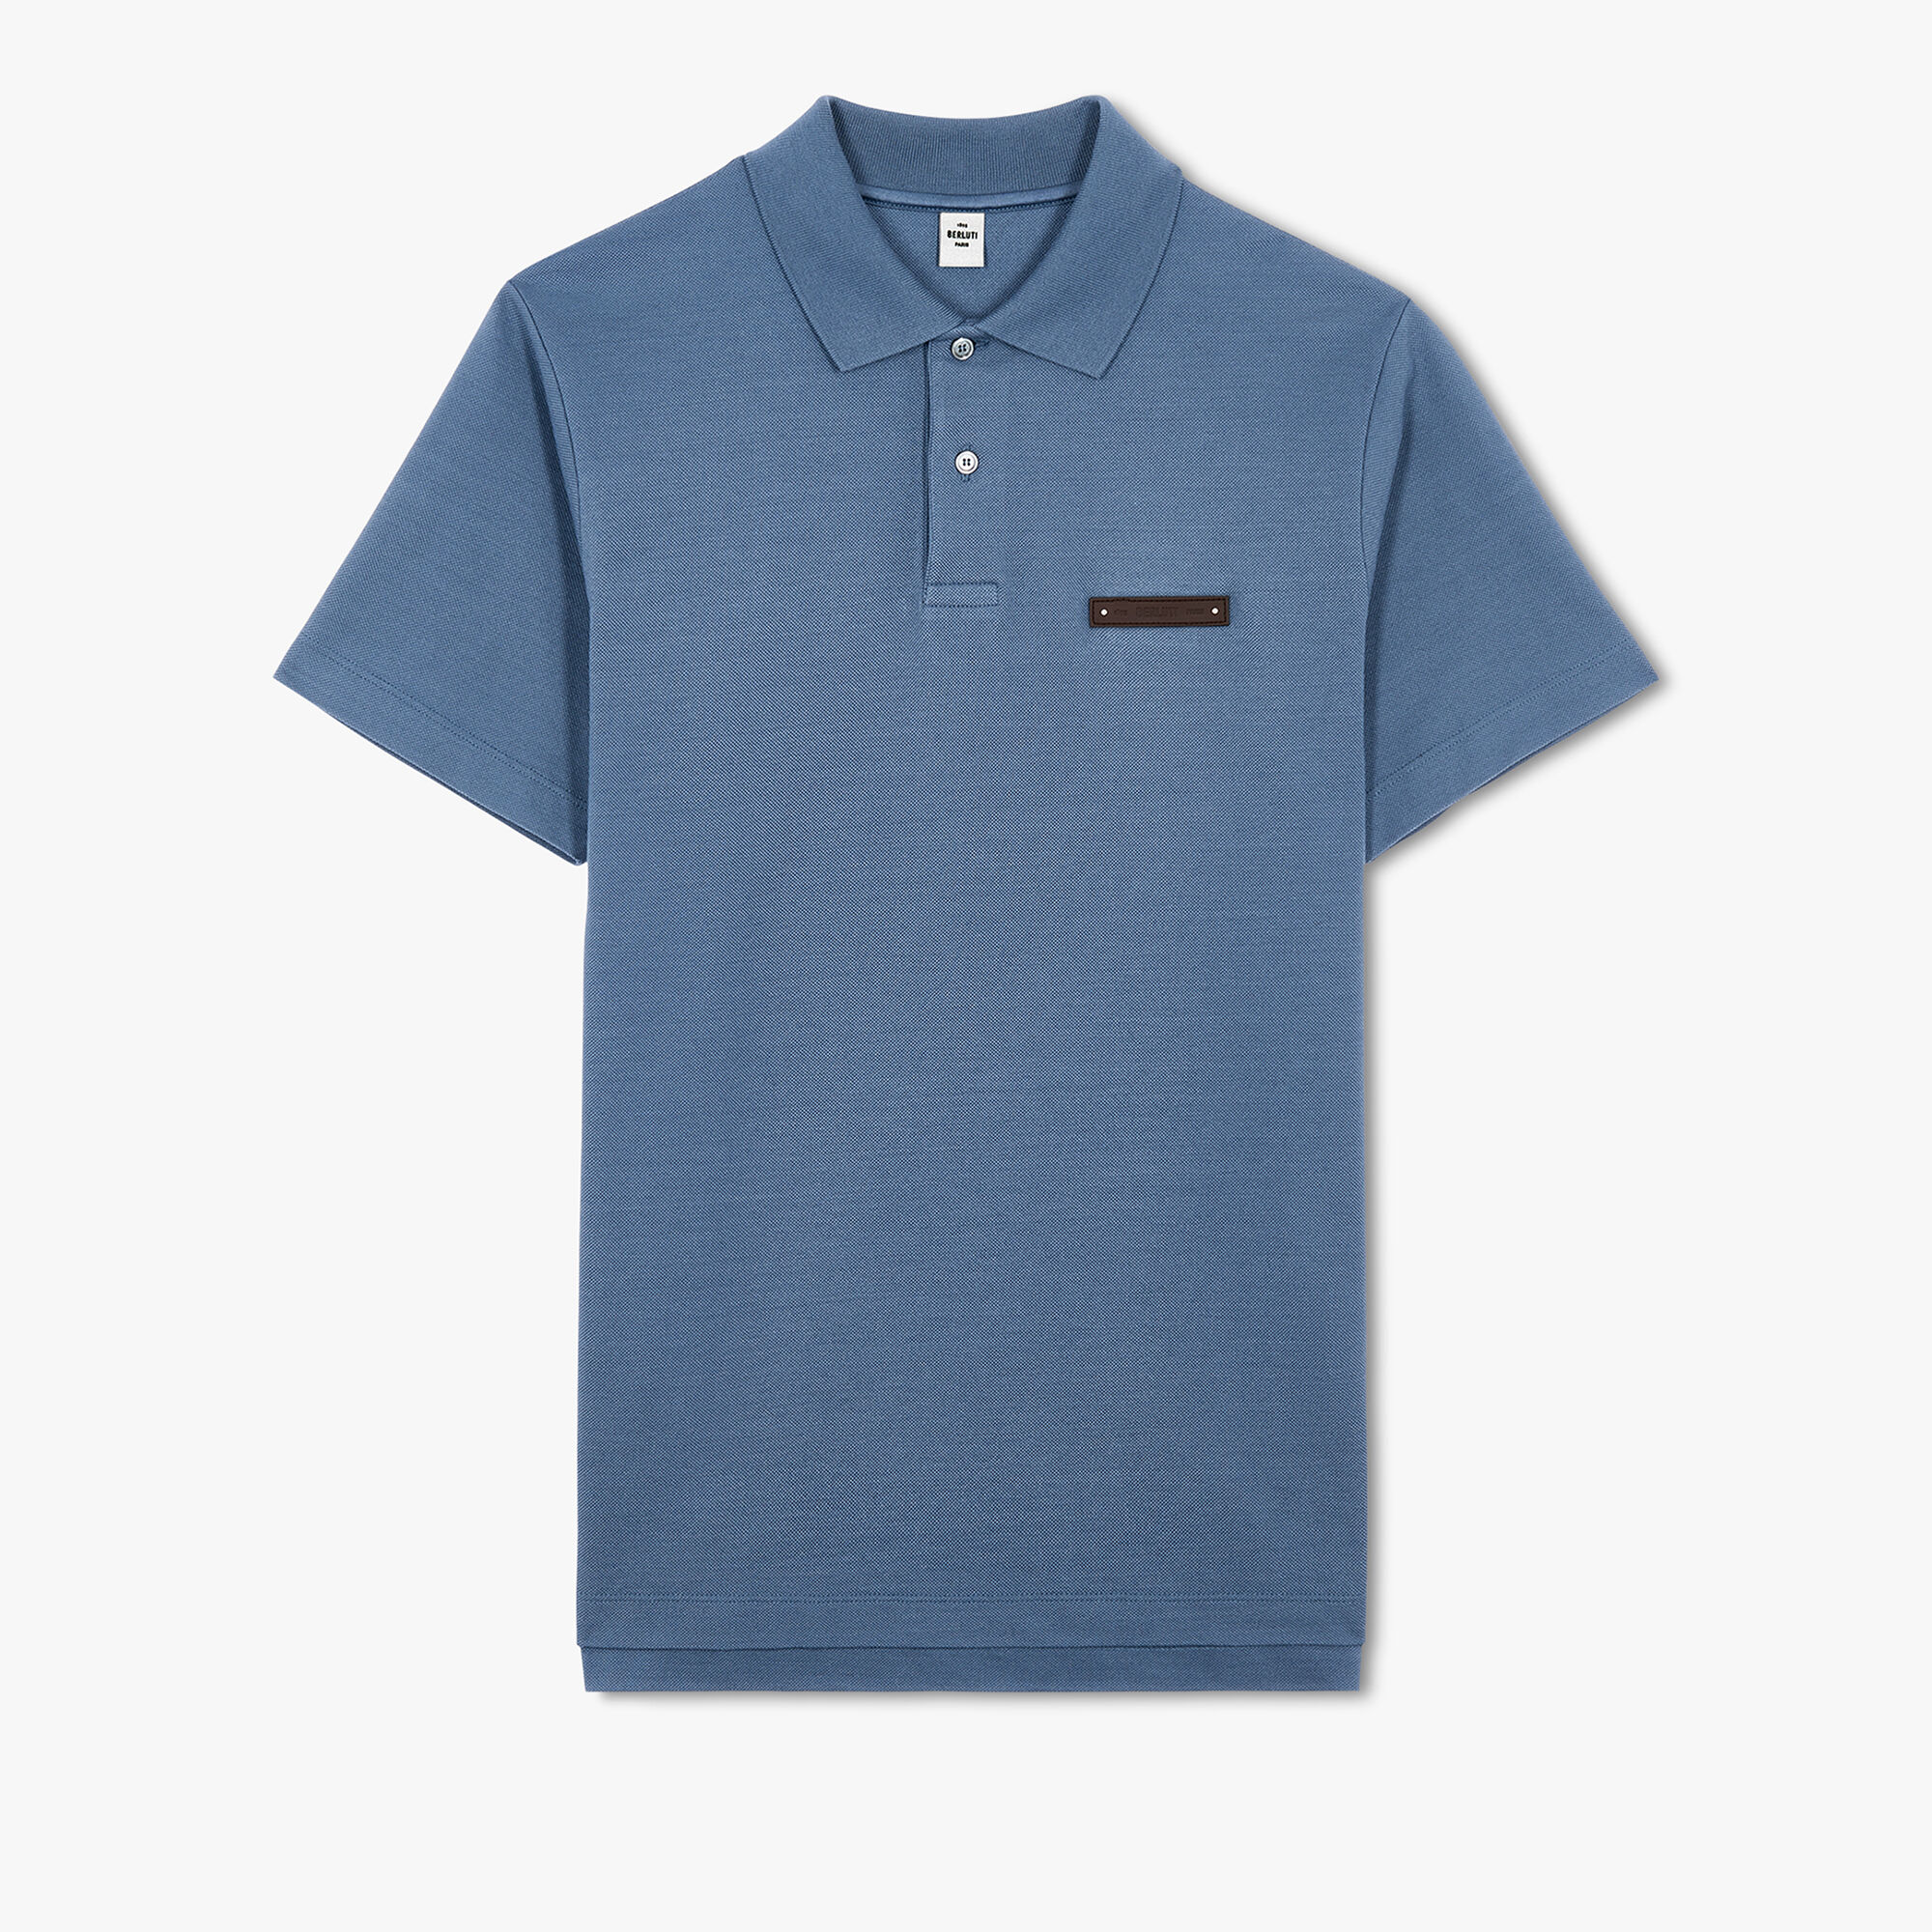 Polo and Tshirt collections by Berluti - US